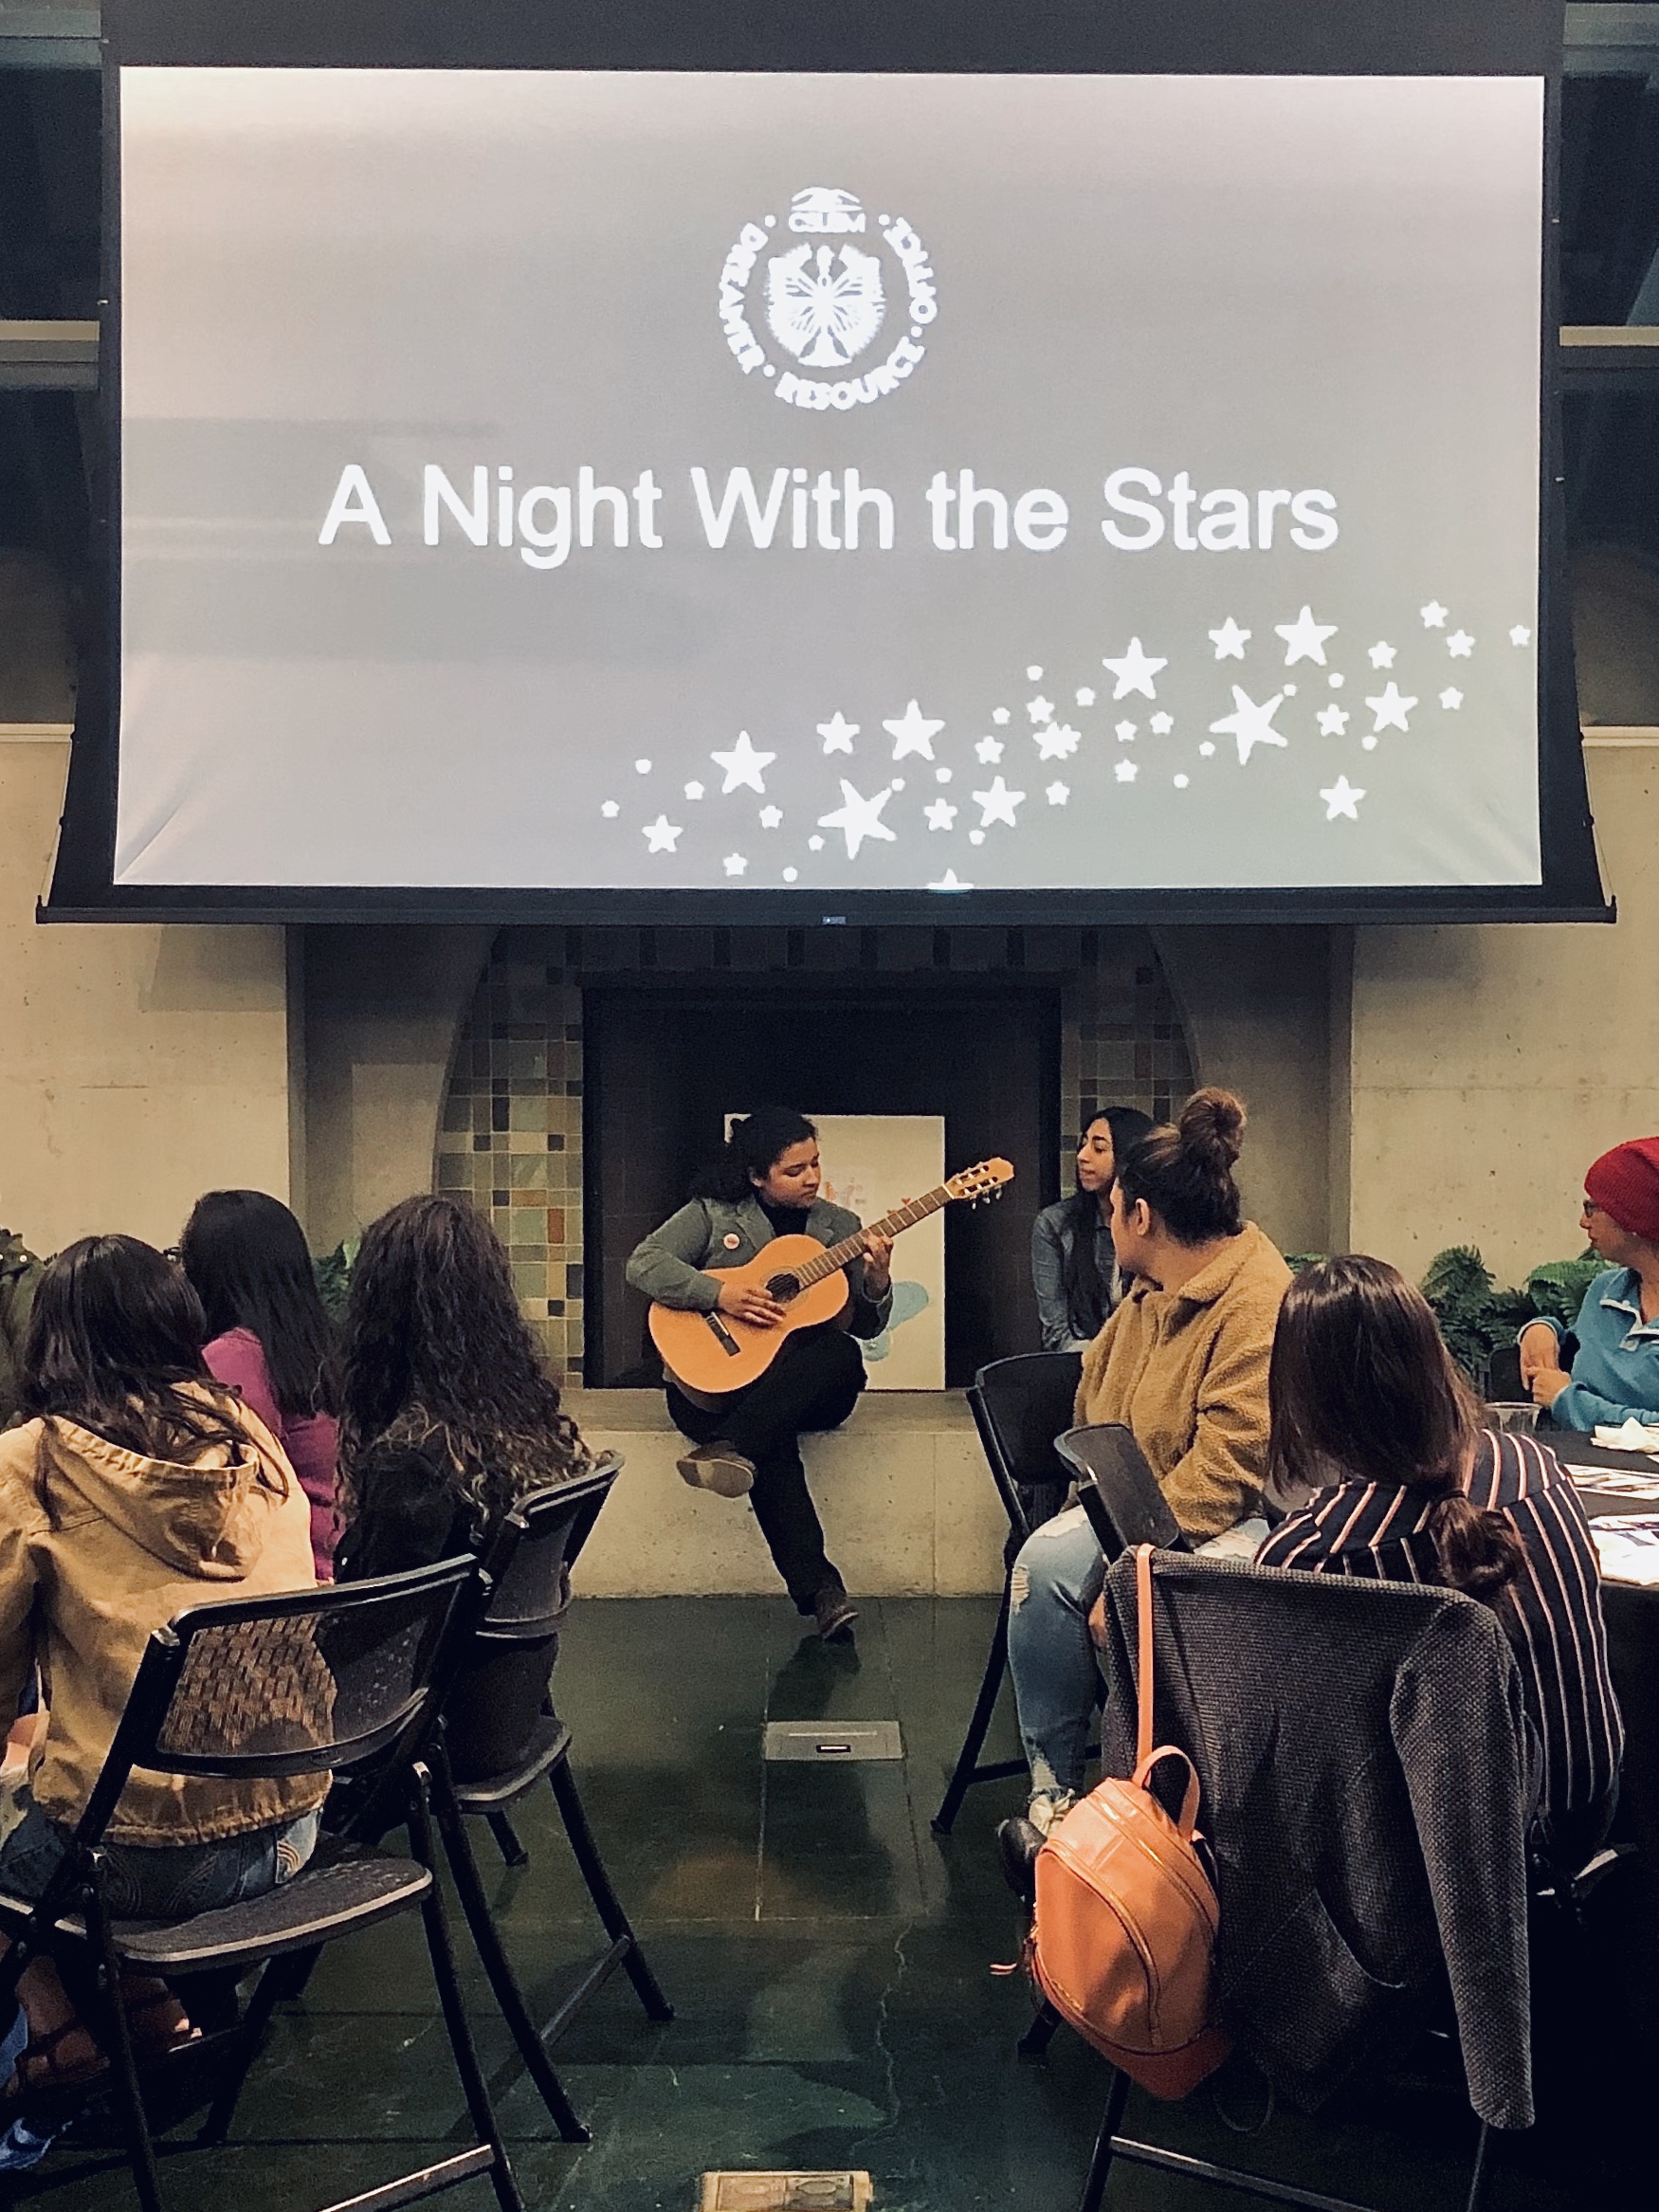 Night with the stars event